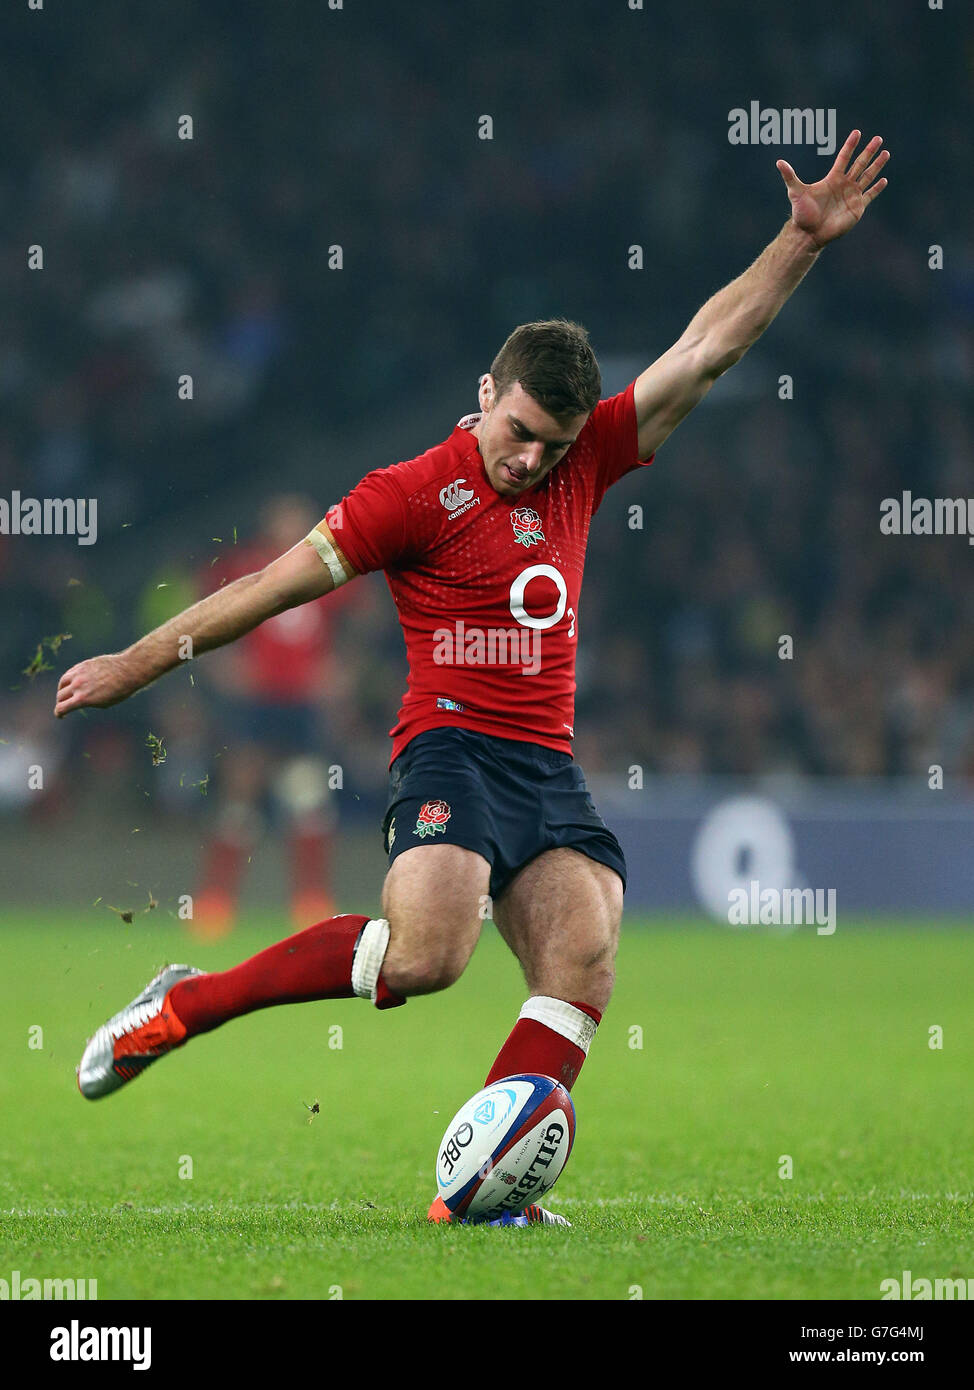 England's George Ford in action during the QBE International match at Twickenham, London. Stock Photo